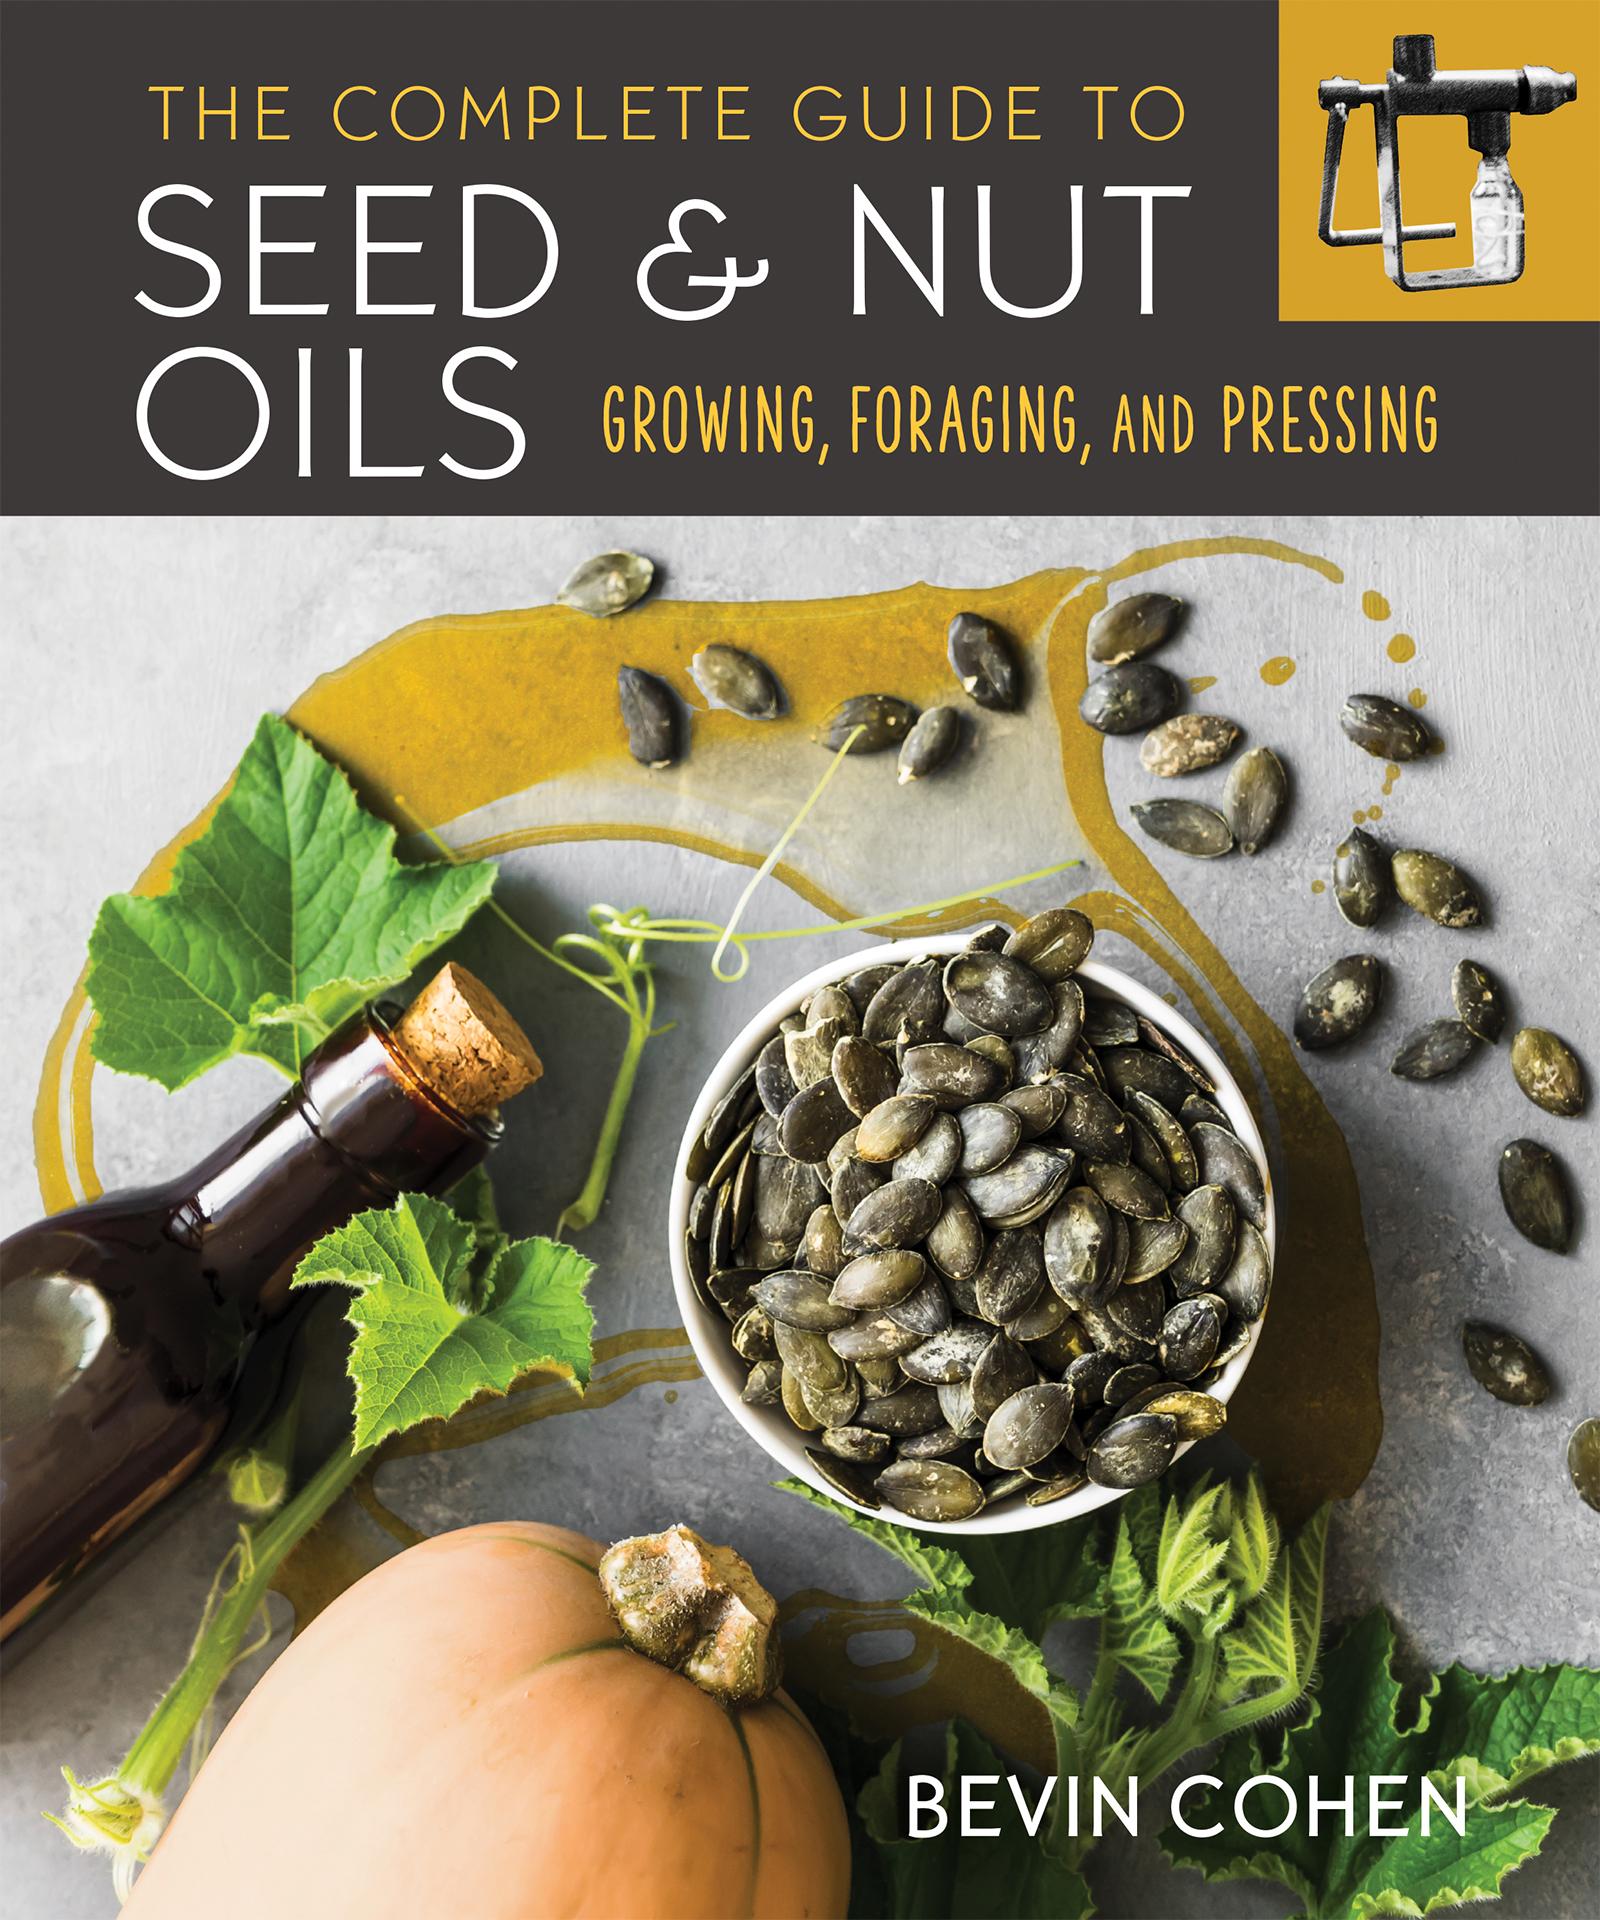 The Complete Guide to Seed & Nut Oils book cover